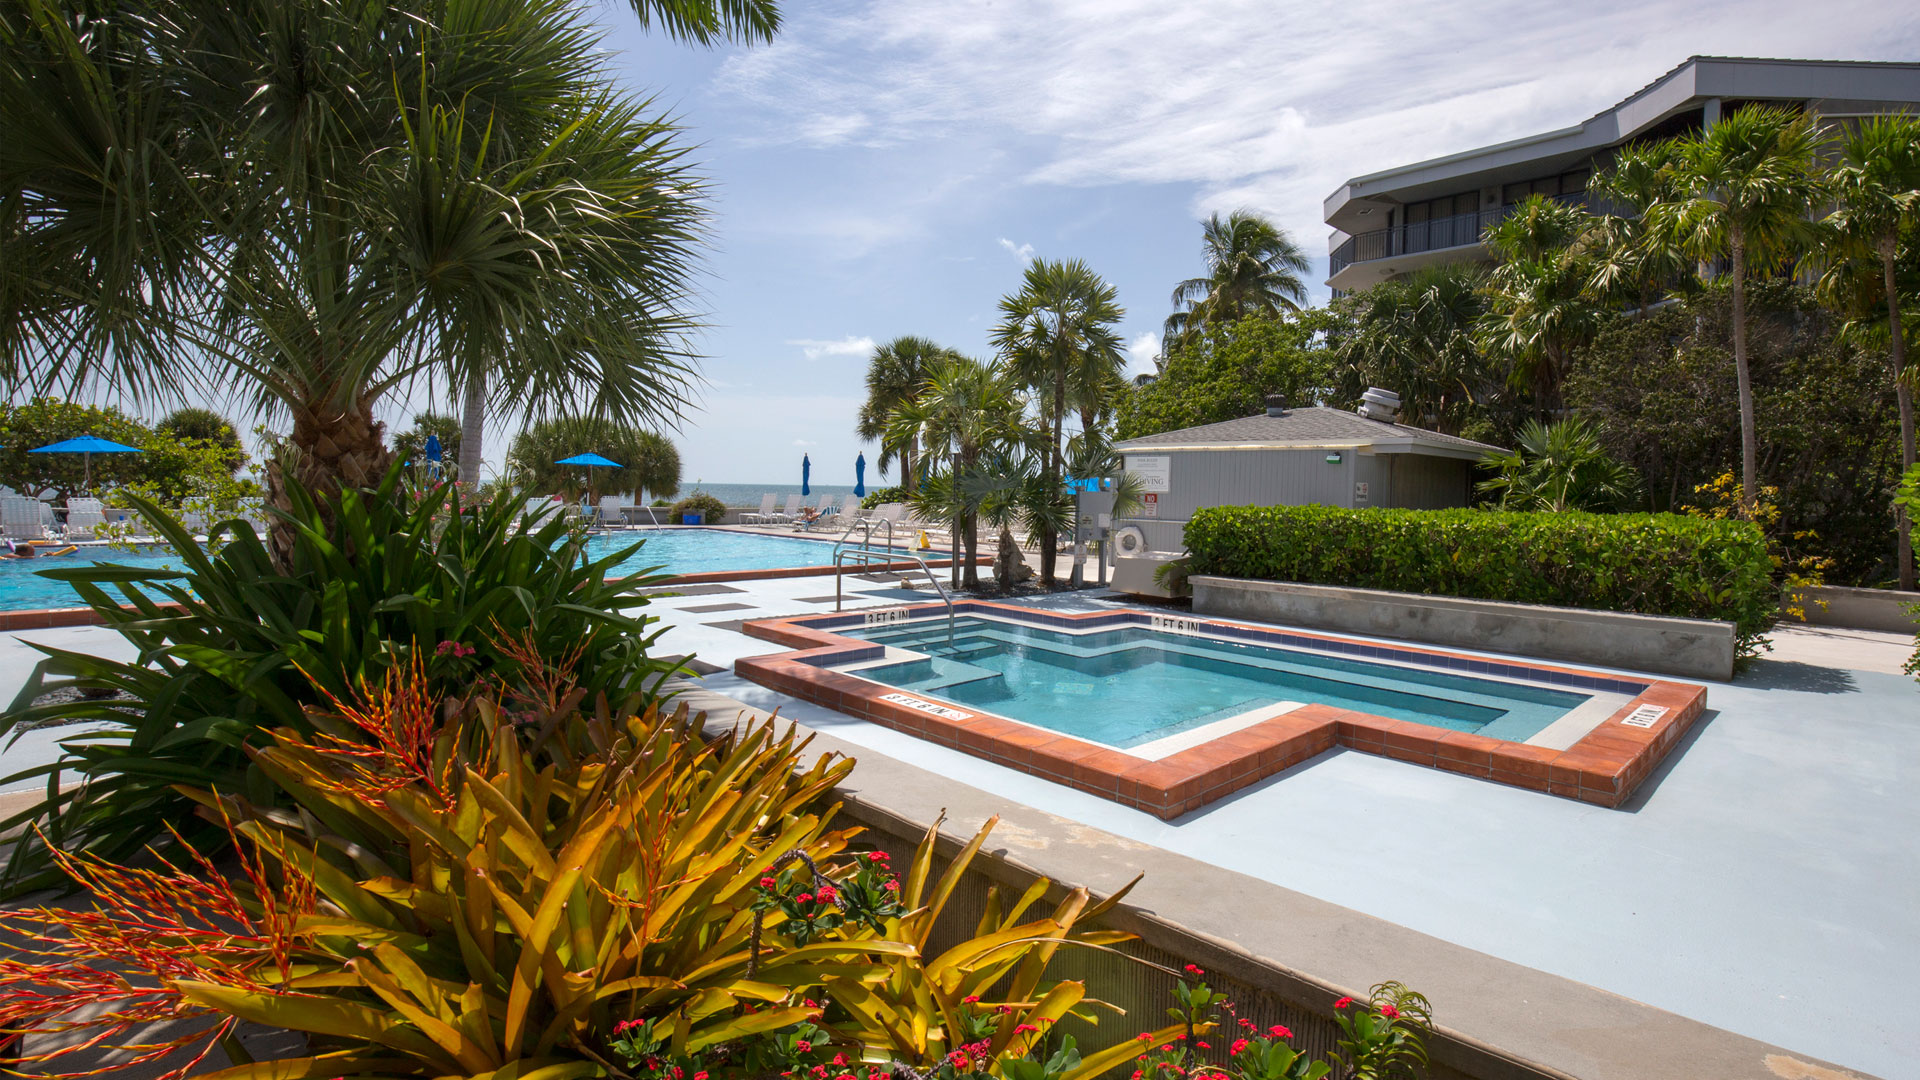 Here at All Florida Keys Property Management, we provide resort style class of service while providing over three decades of experience in Key West rentals.